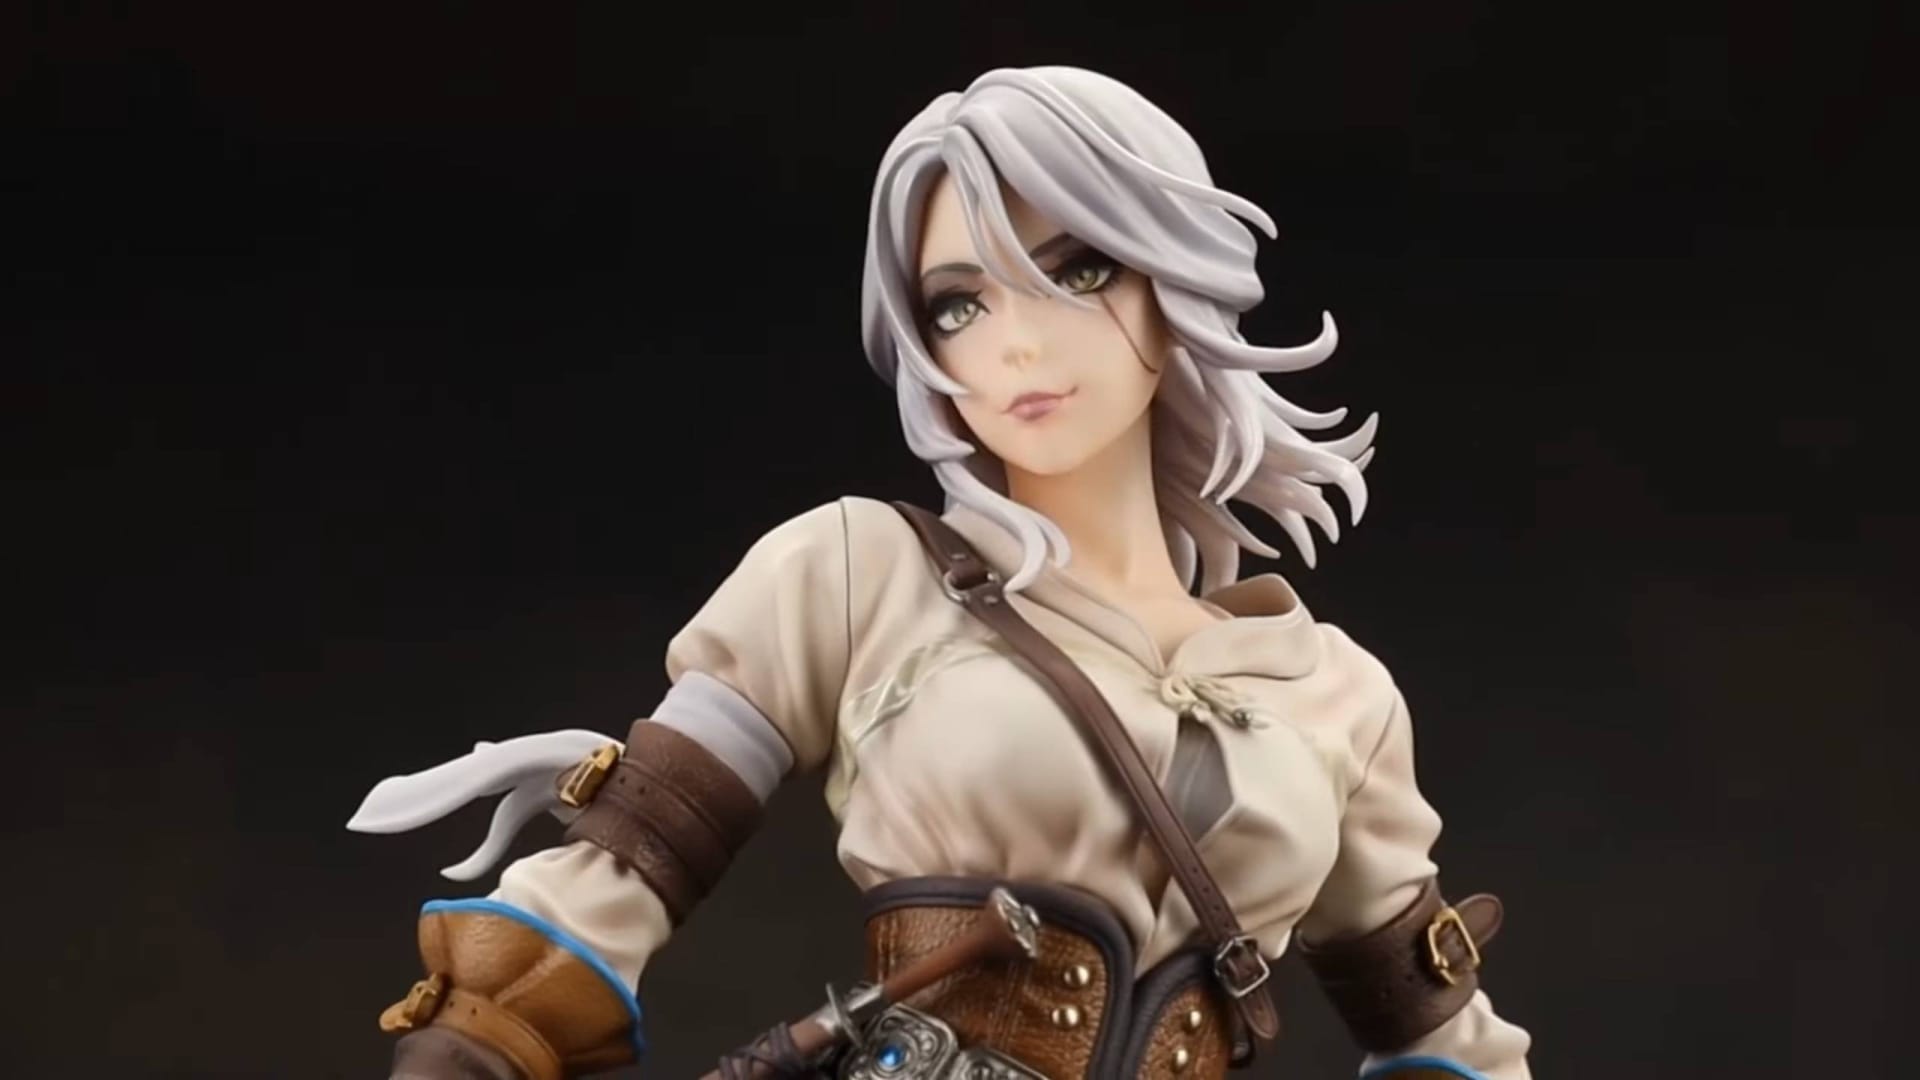 Bishoujo Figure of Ciri from The Witcher Revealed, and She’s Absolutely Gorgeous